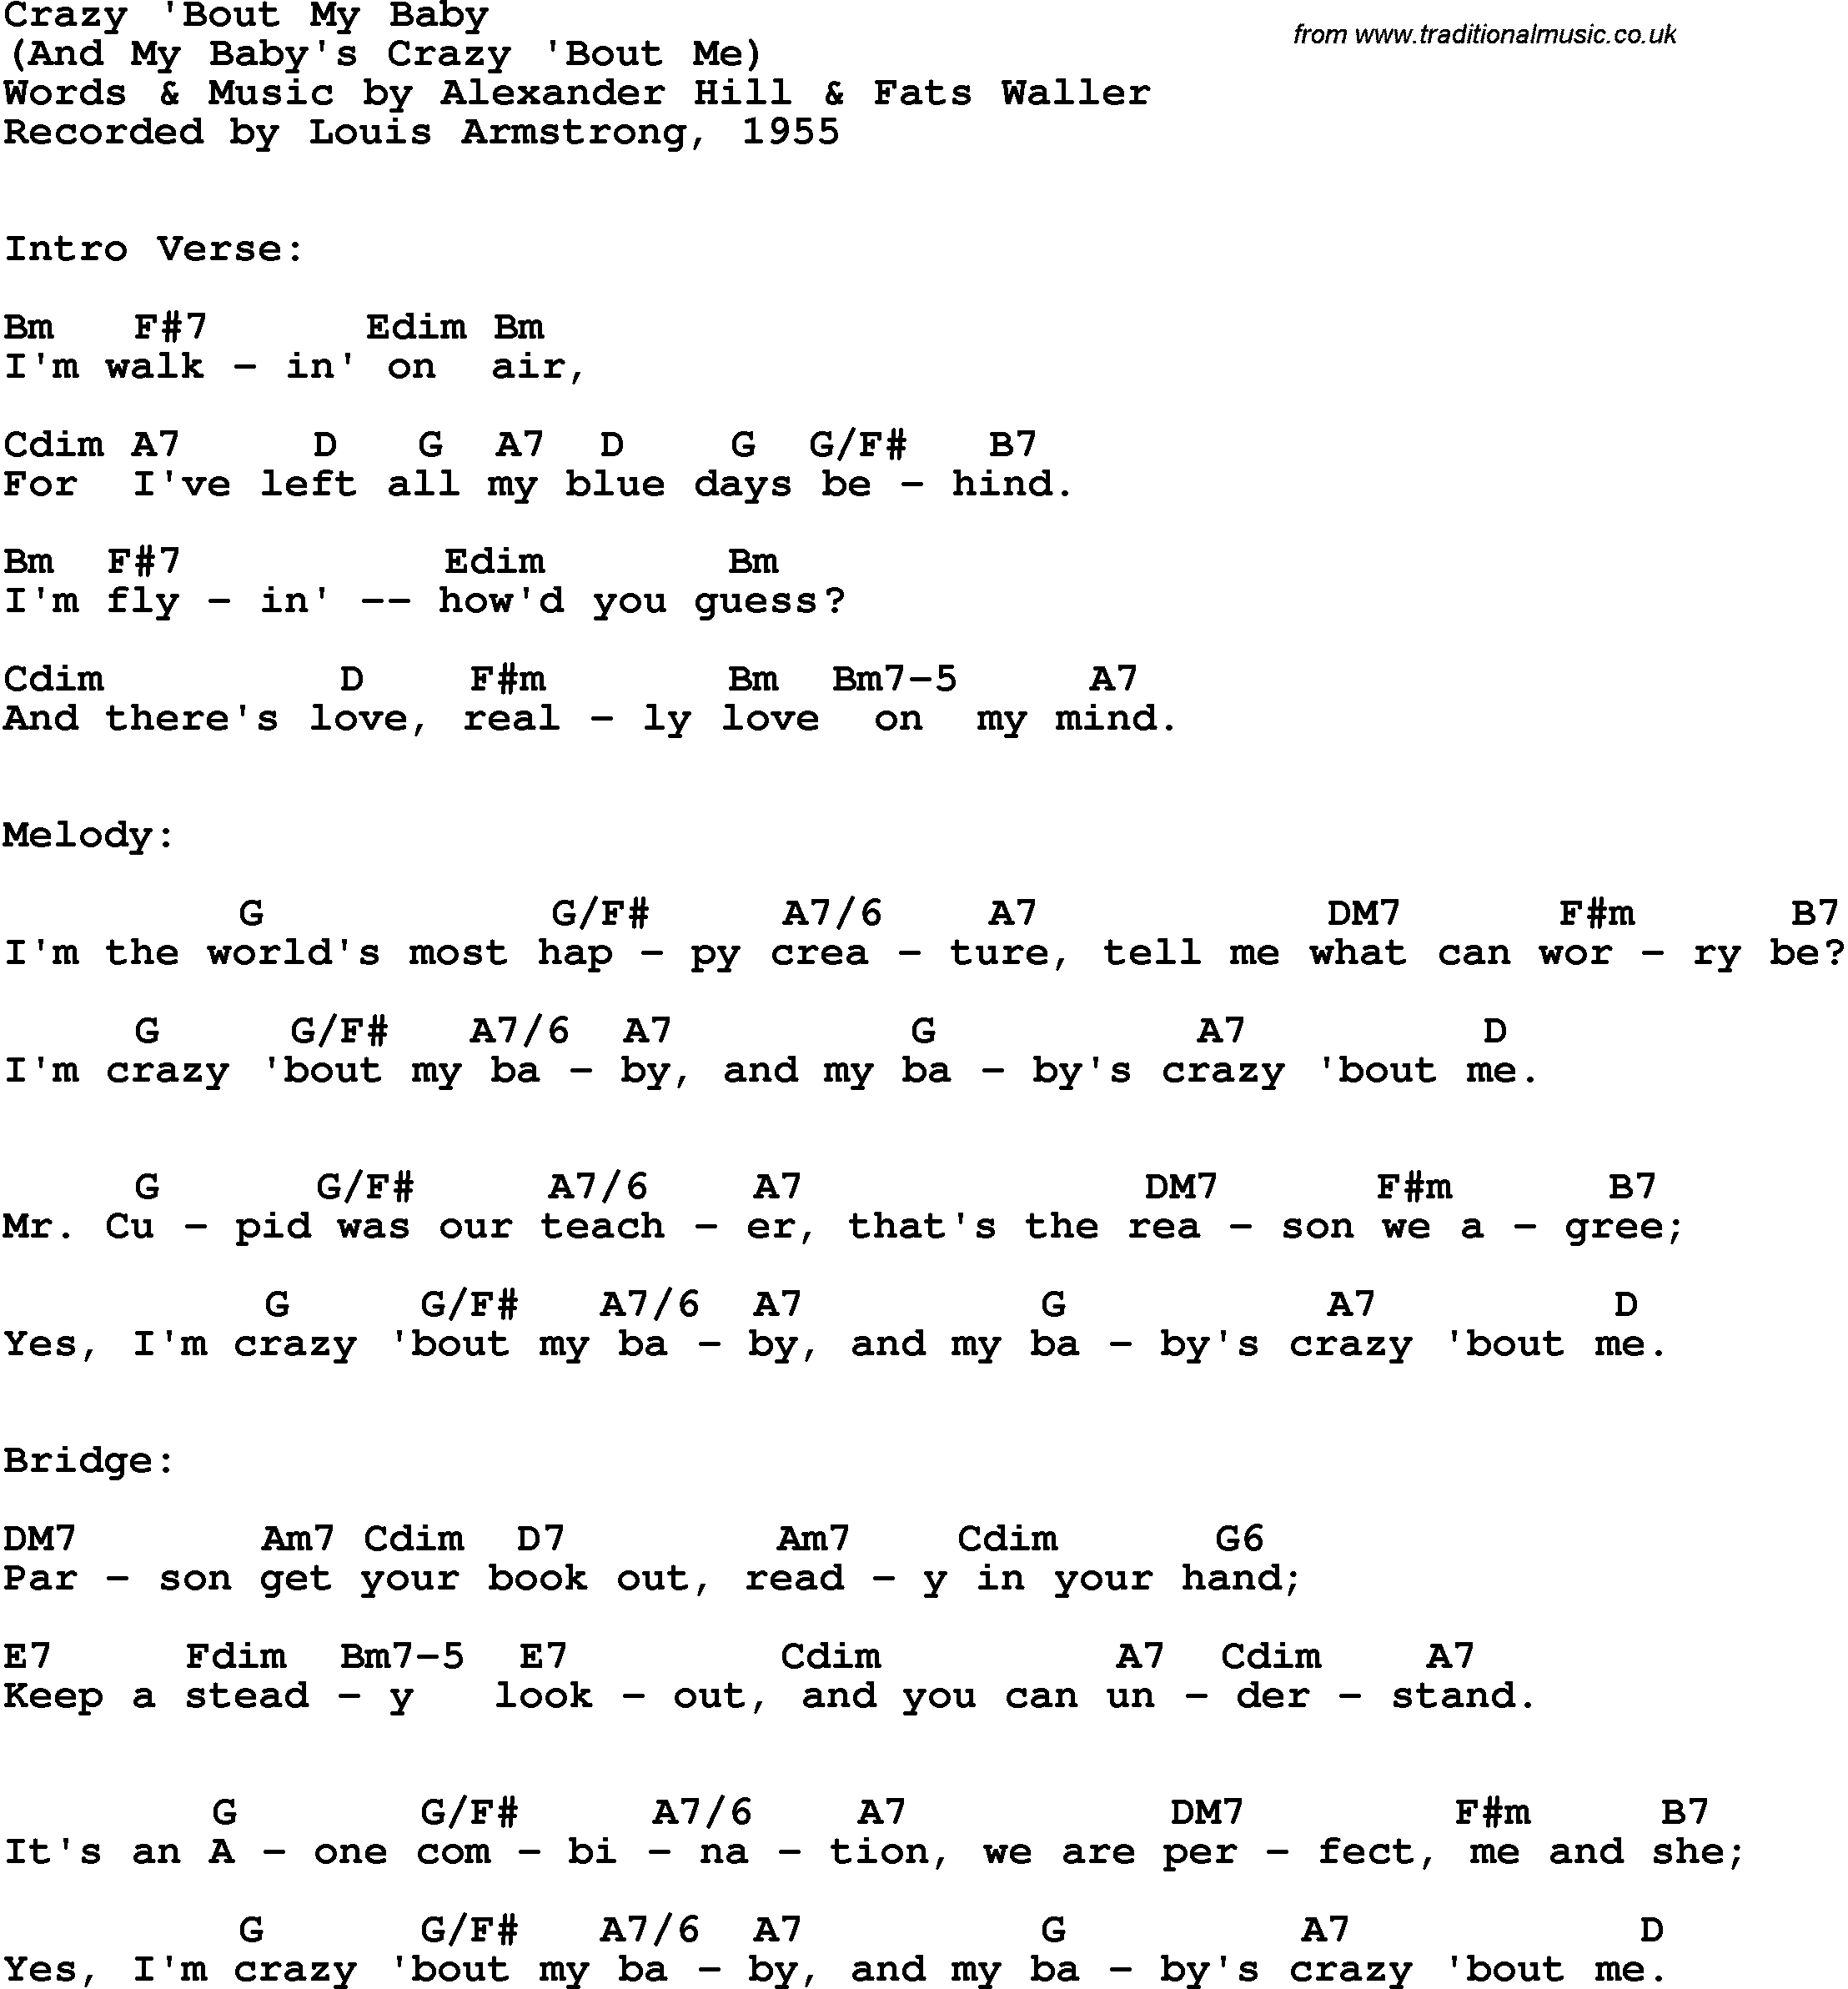 Song Lyrics with guitar chords for Crazy 'bout My Baby - Louis Armstrong, 1955